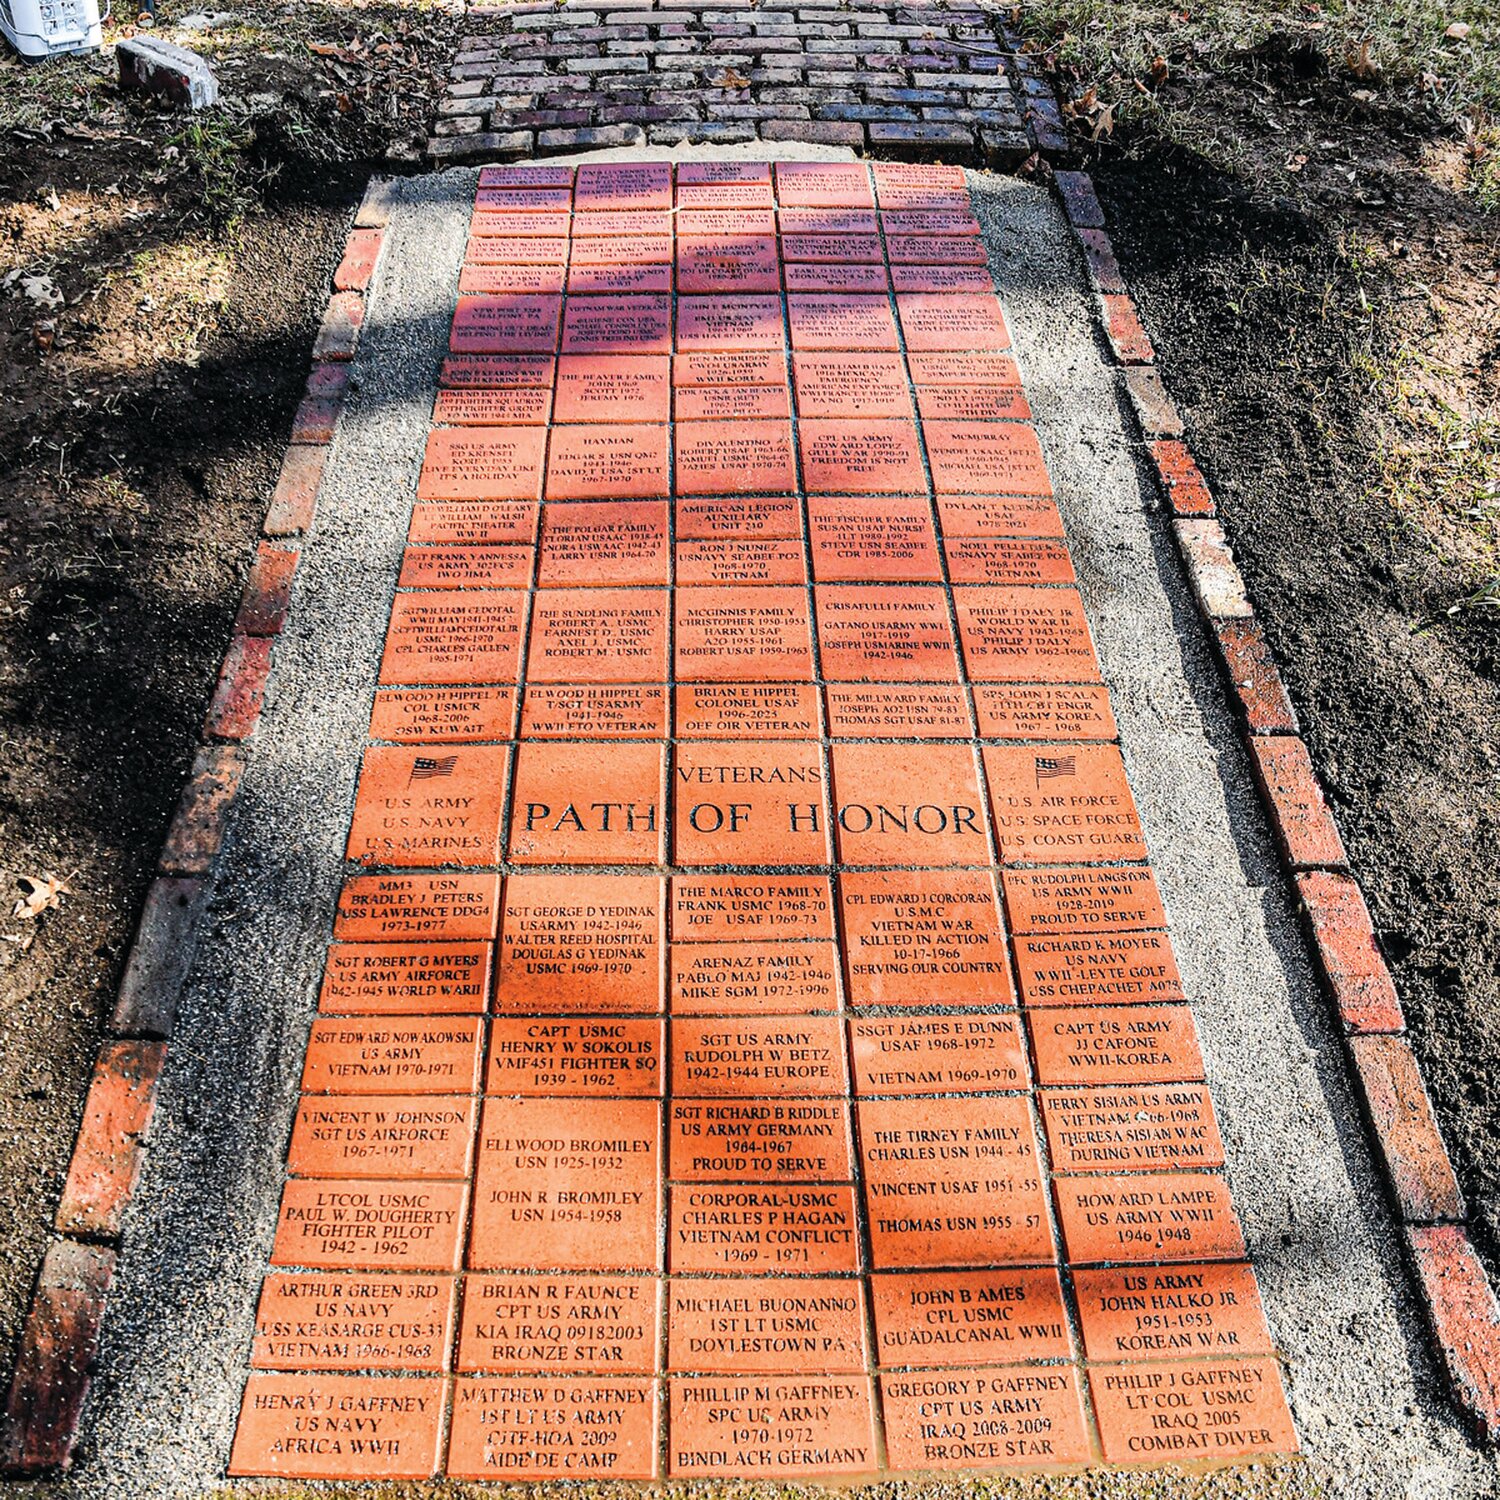 The first section of the Path of Honor at Doylestown American Legion Post 210, featuring 92 bricks, is now complete. It will be dedicated in the spring, when preparations for the second section of the path are set to begin.